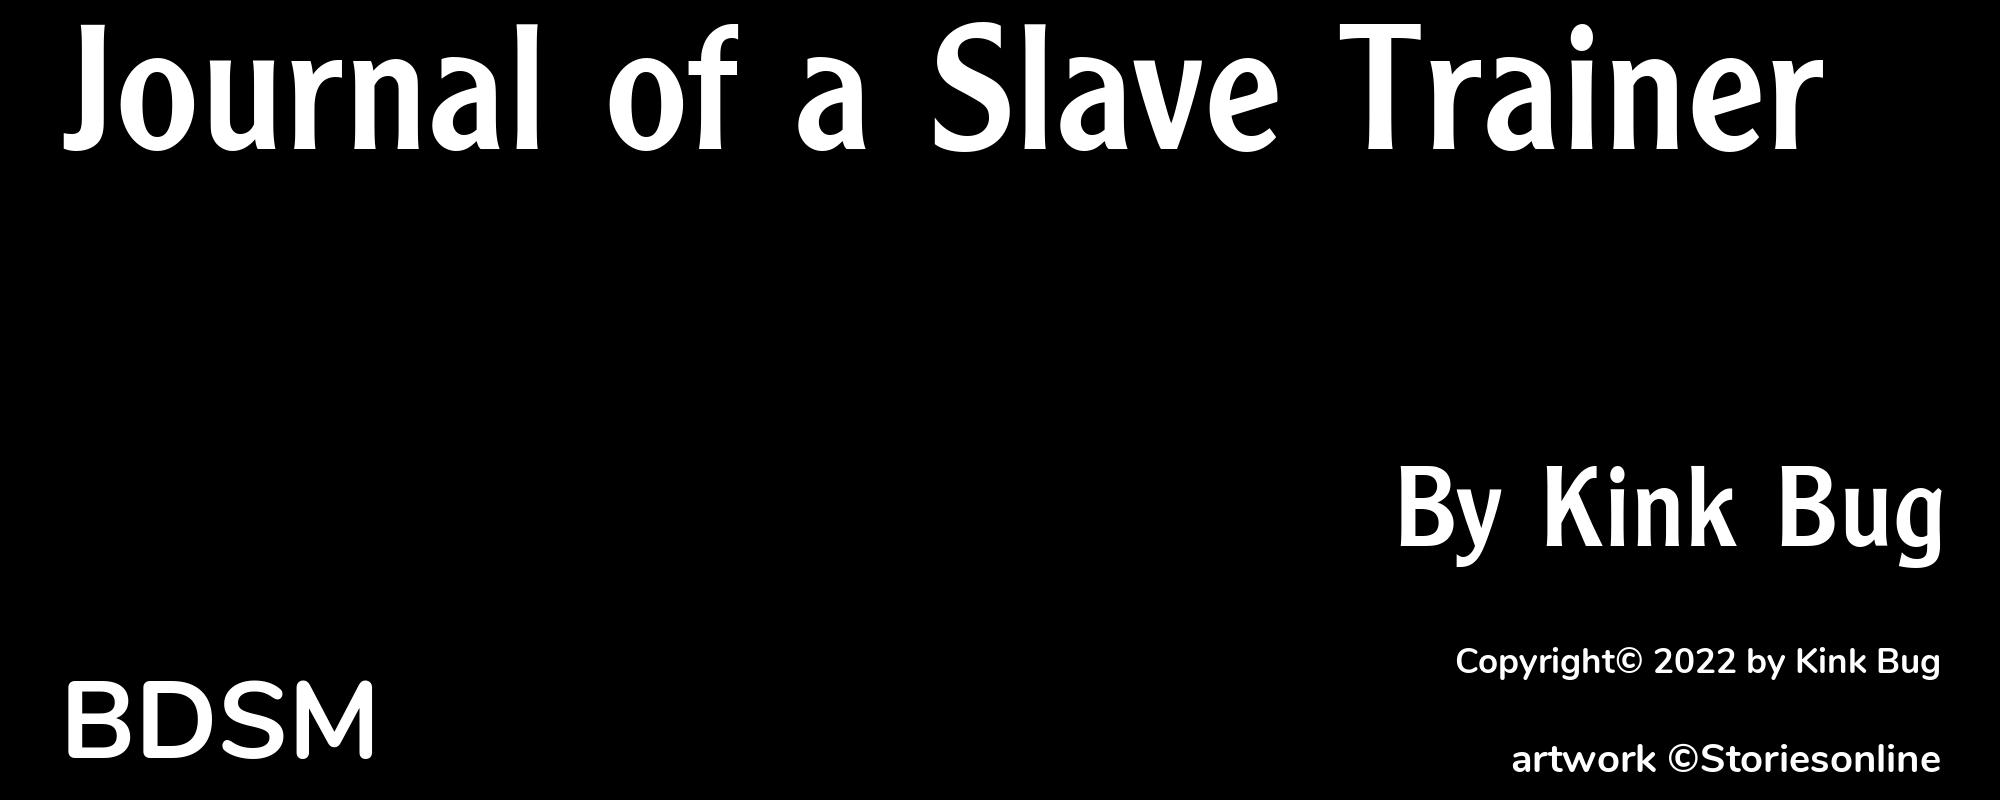 Journal of a Slave Trainer - Cover